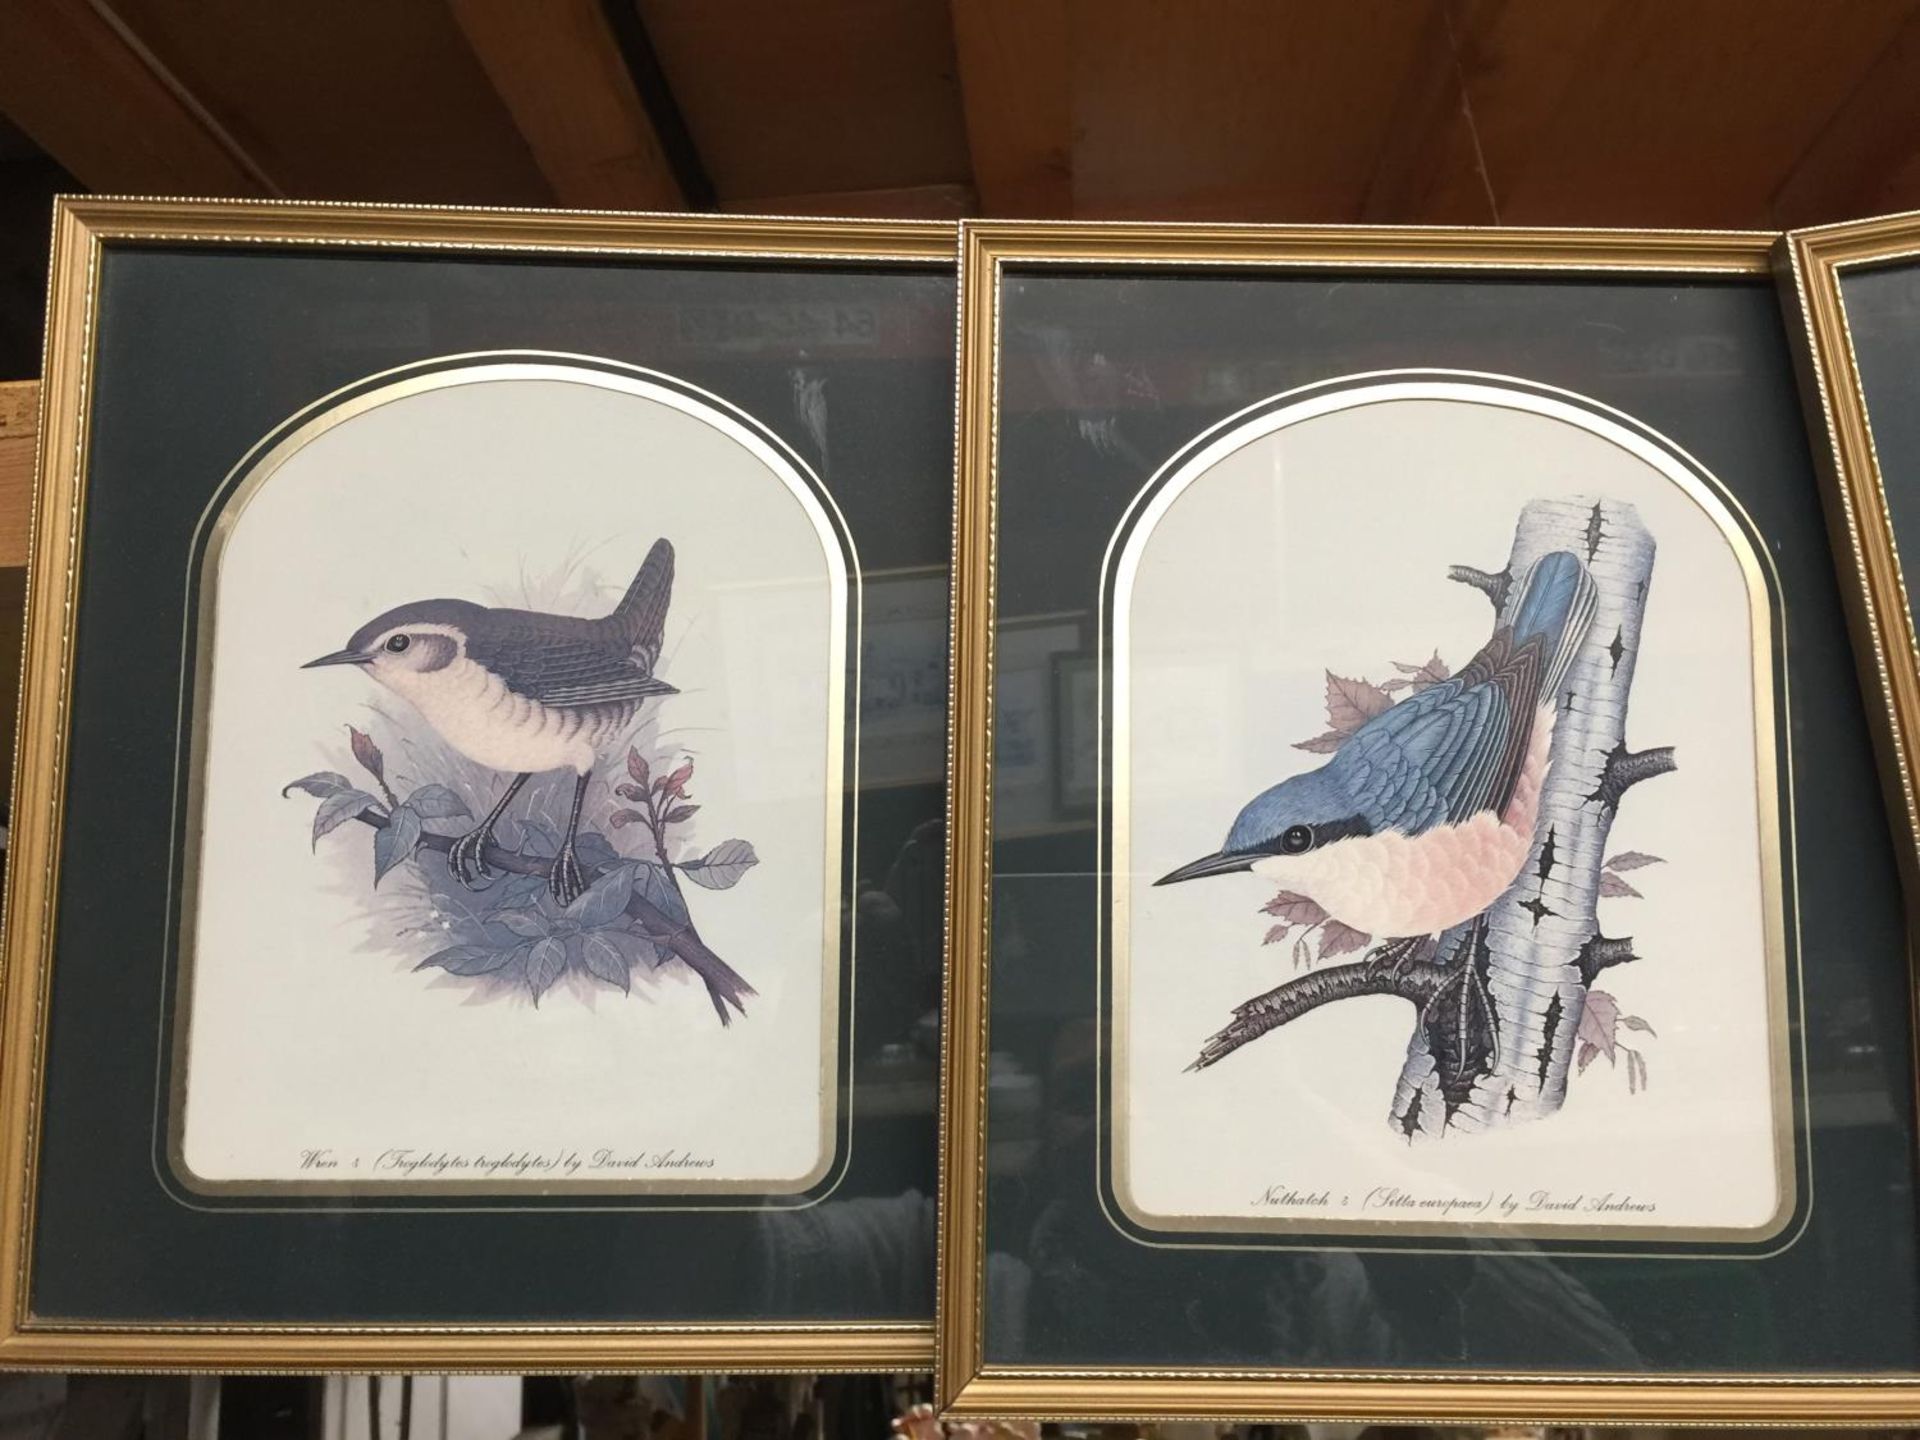 FOUR FRAMED PRINTS OF GARDEN BIRDS TO INCLUDE A SONG THRUSH, CHAFFINCH, NUTHATCH AND WREN - Image 5 of 6